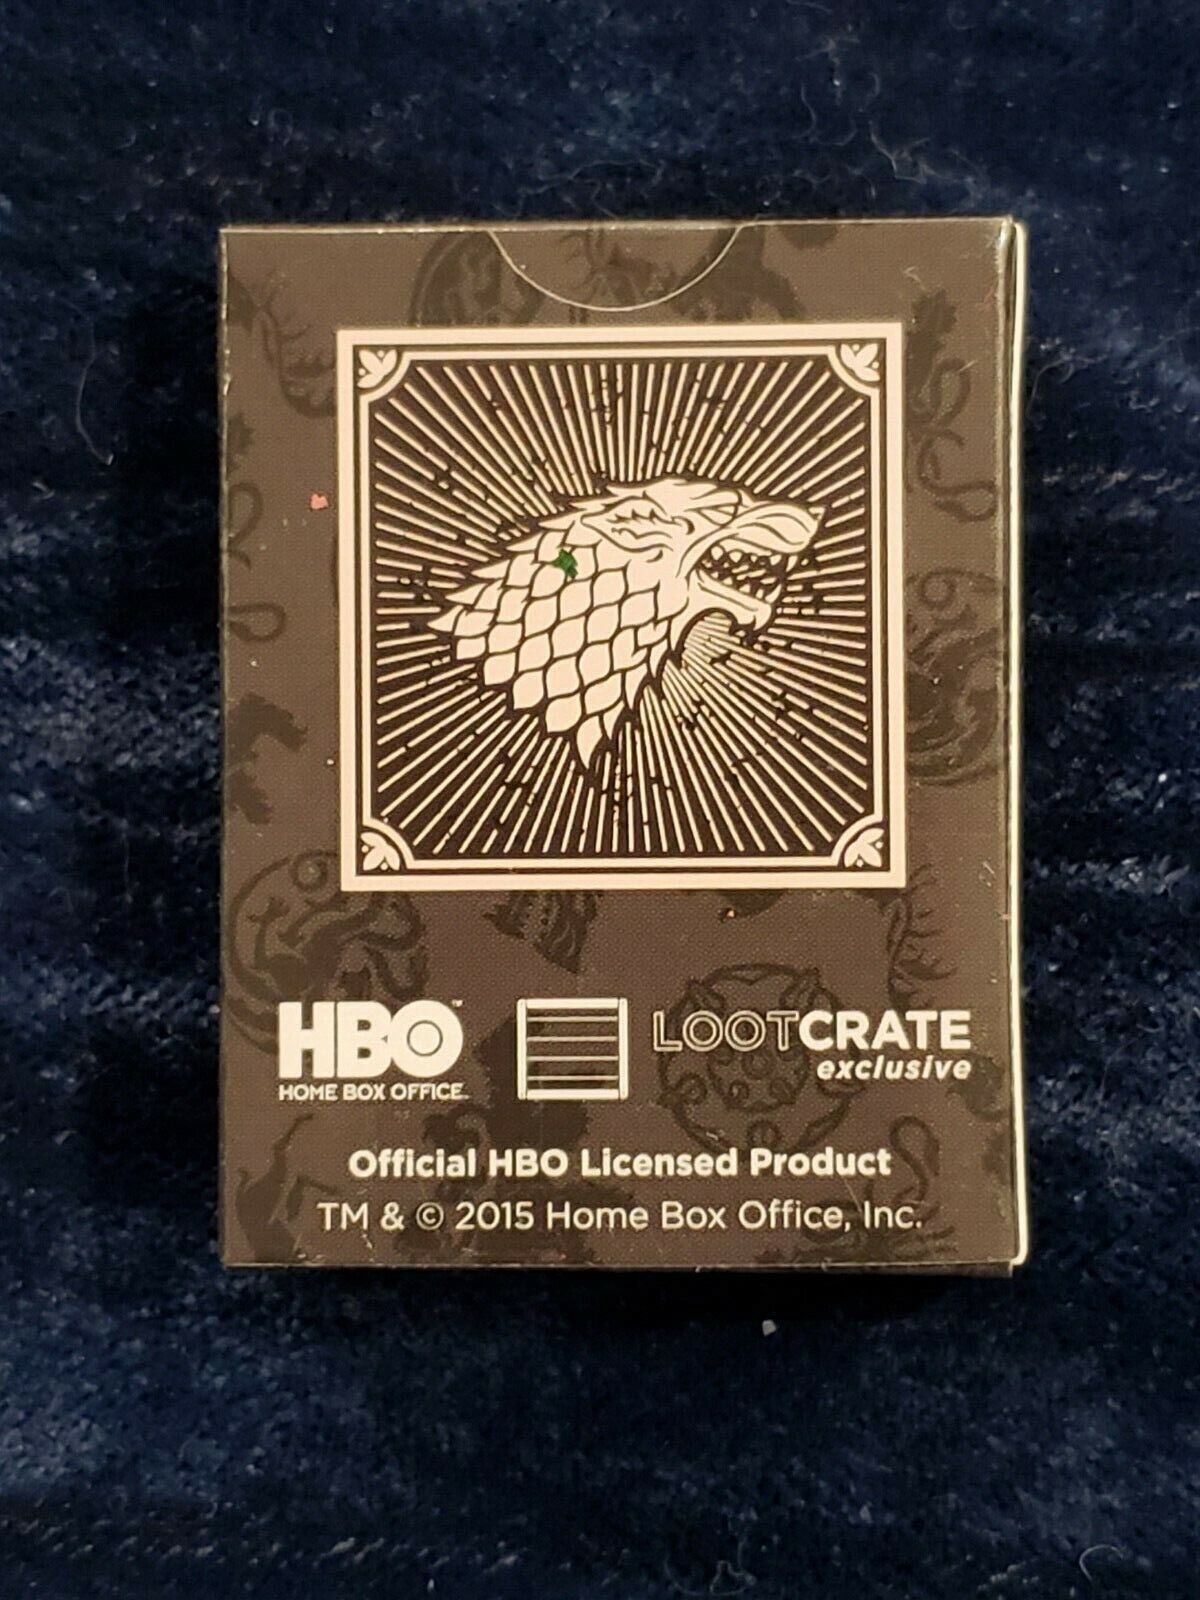 GAME OF THRONES STARK 4GB USB Flash Drive - HBO - LOOT CRATE Exclusive - NICE